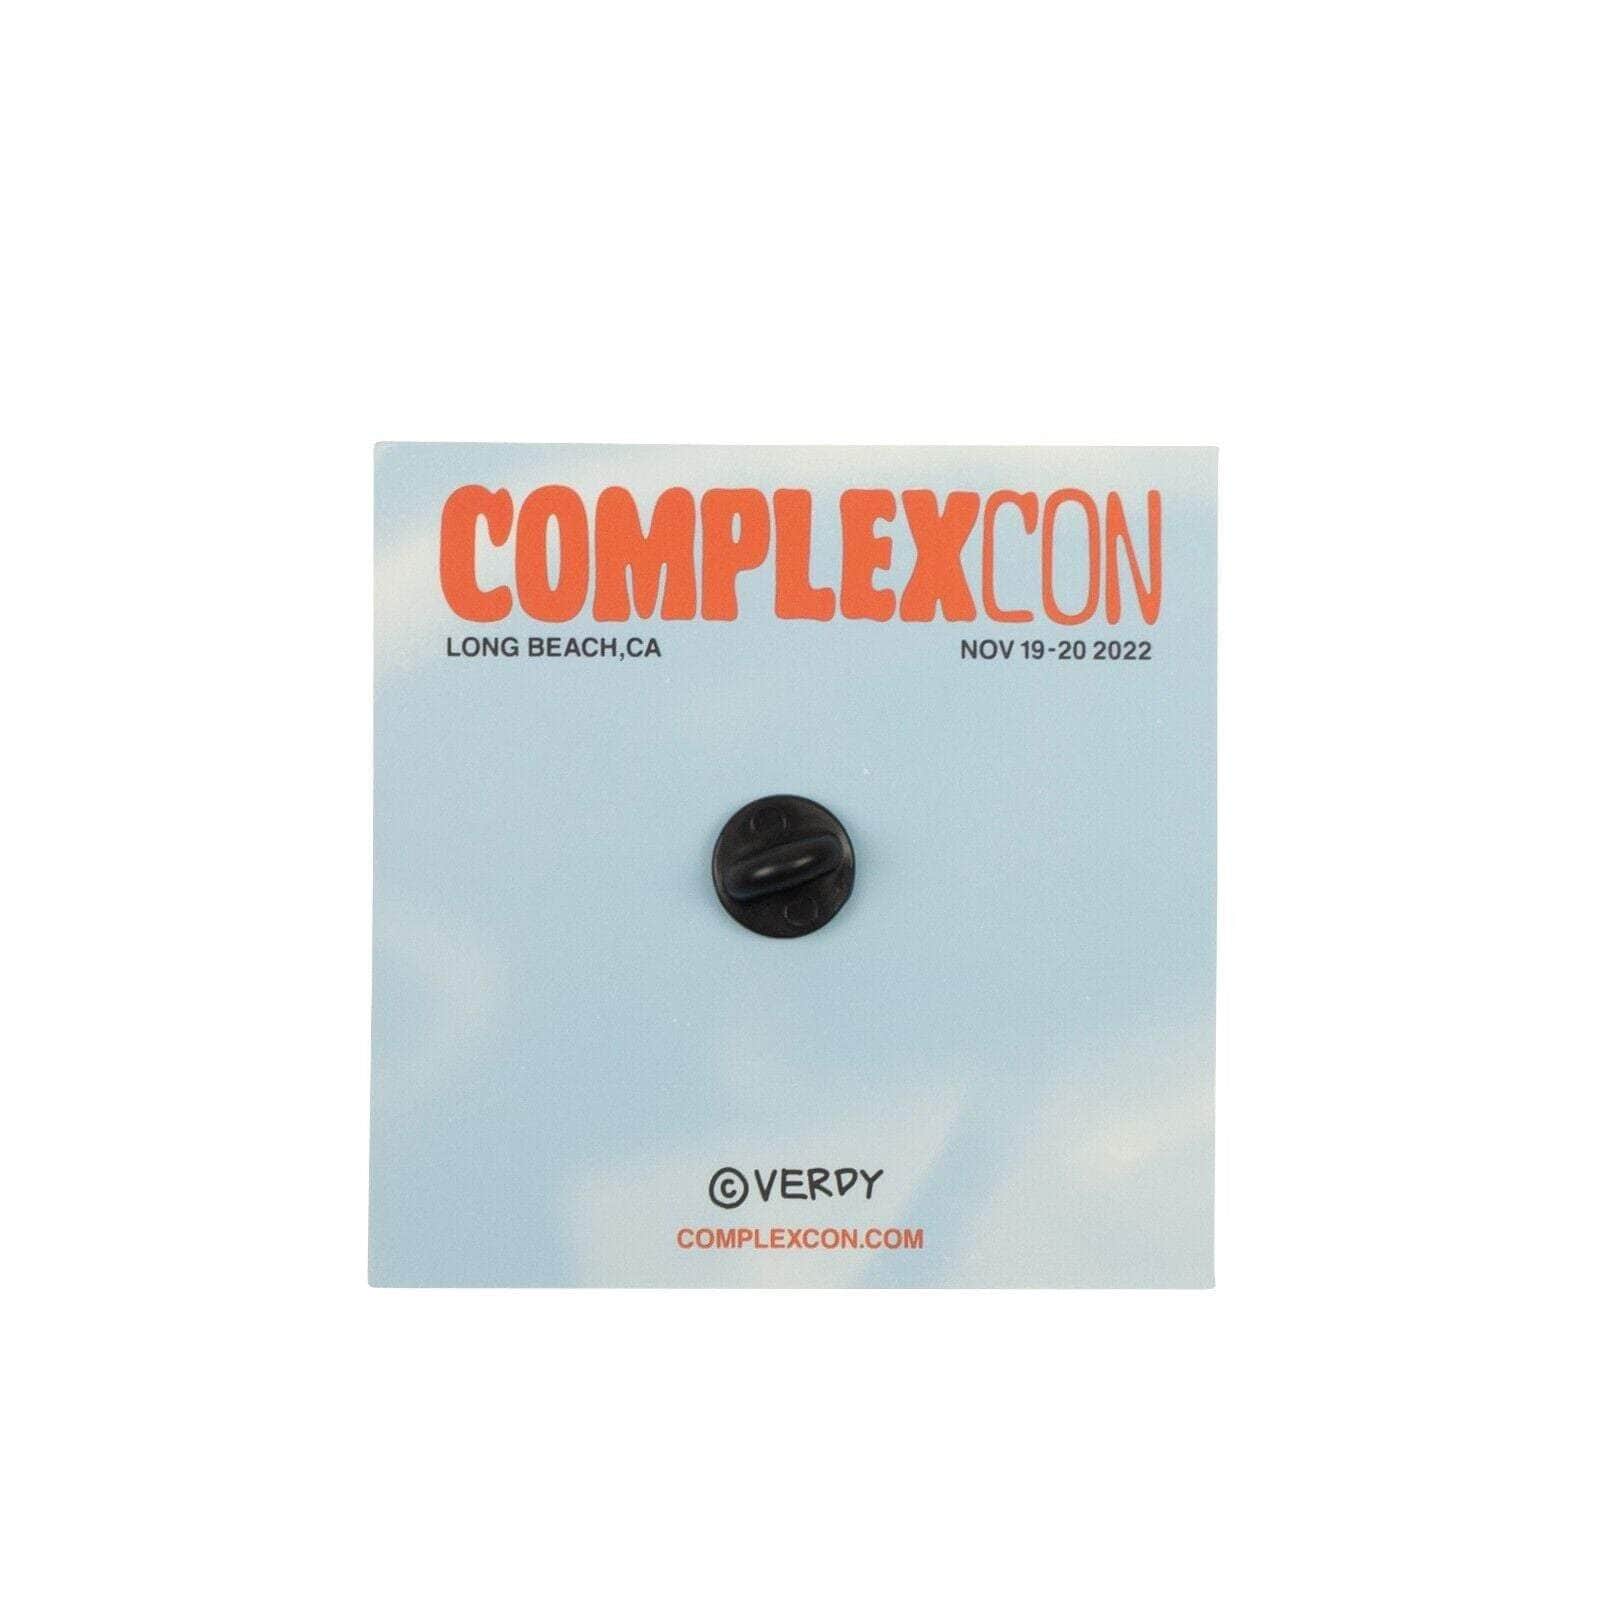 Complexcon x Verdy channelenable-all, chicmi, complexcon-x-verdy, couponcollection, gender-mens, main-accessories, mens-shoes, mens-tie-clips-pins, size-os, under-250 OS Vick Multicolored Metal Pin CXN-XACC-0010/OS CXN-XACC-0010/OS